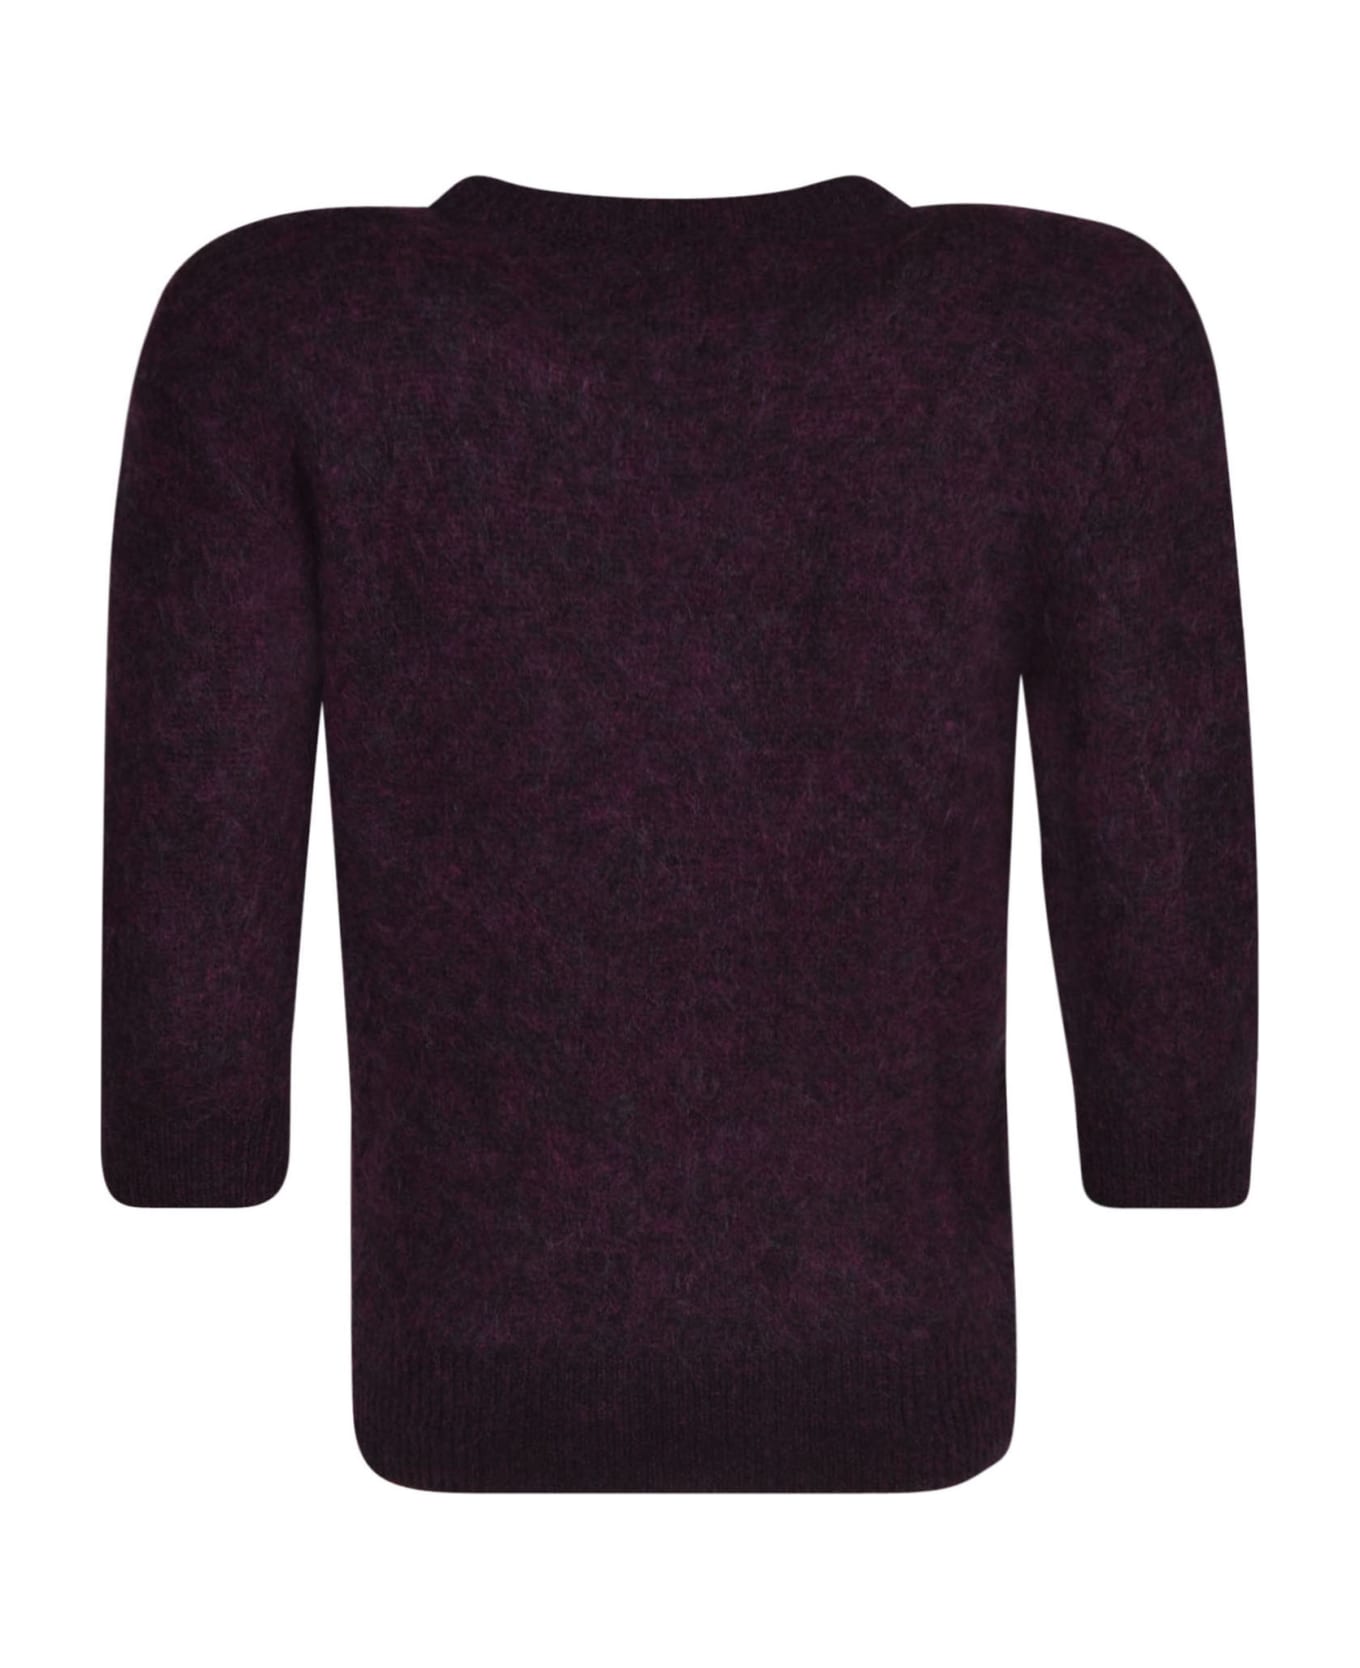 Alessandra Rich Crystals Embellishment Sweater - Violet 